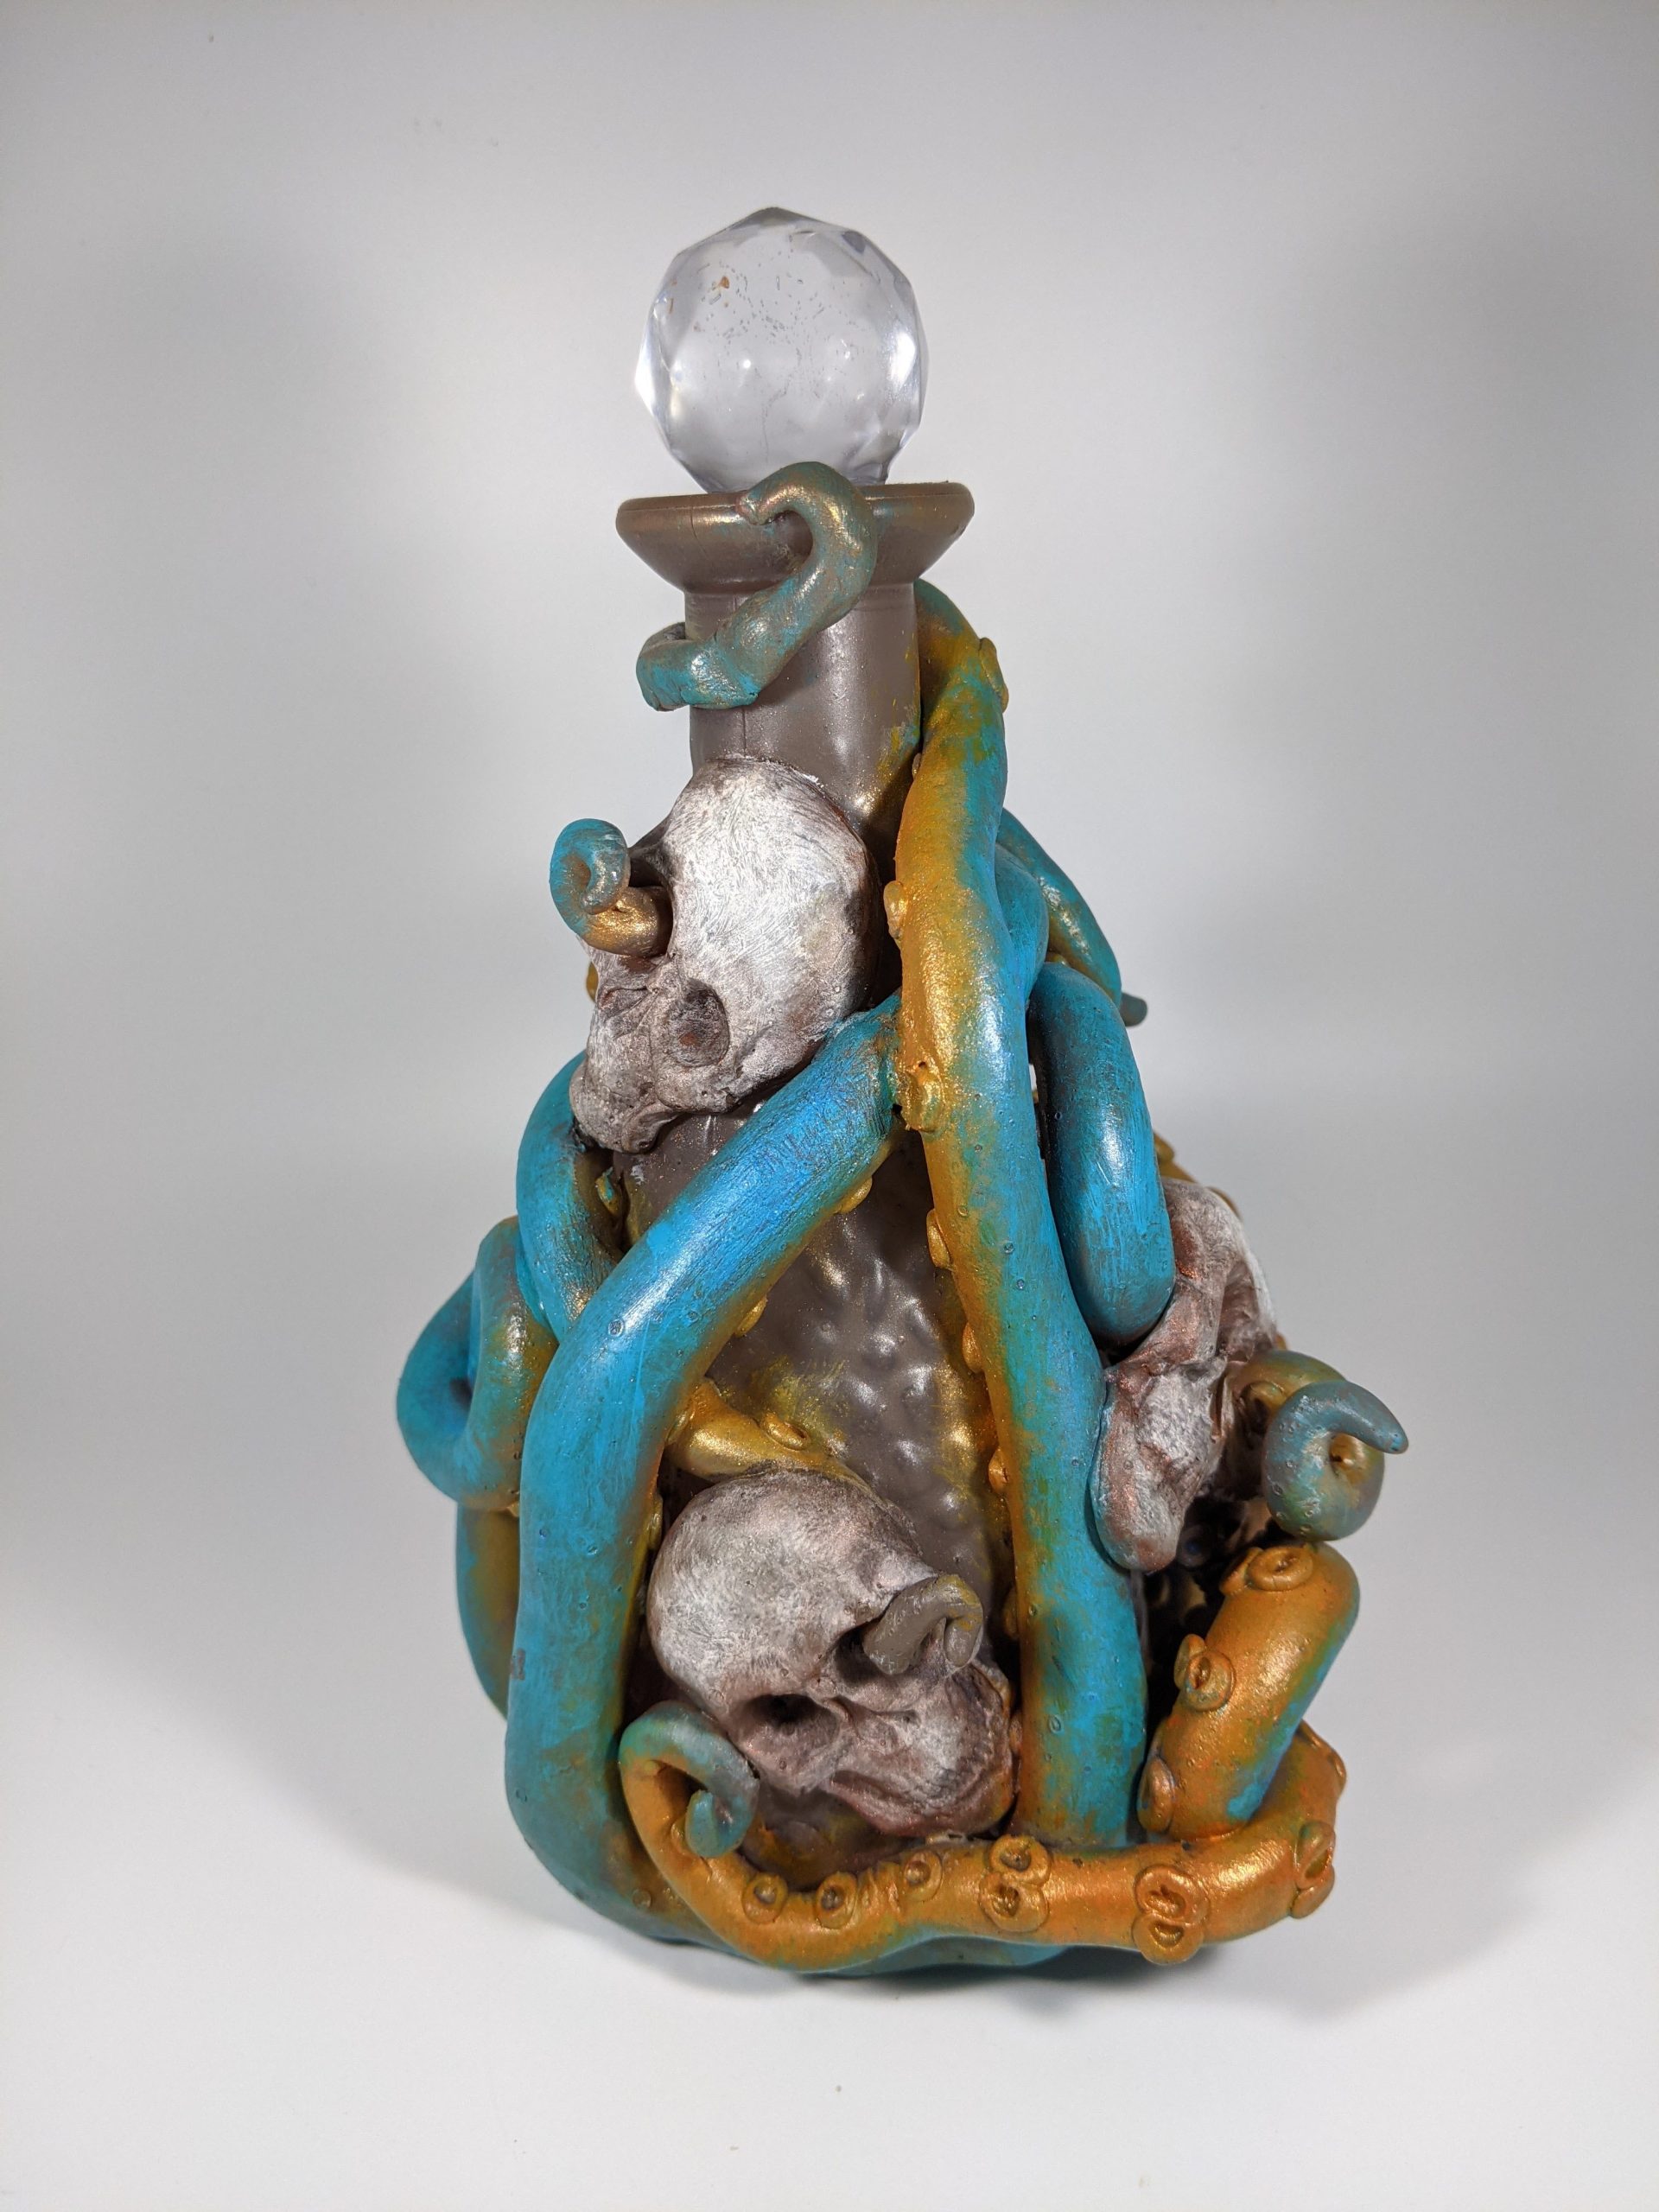 Davey Jones' locker. Tapered bottle wrapped with turquoise octopus.